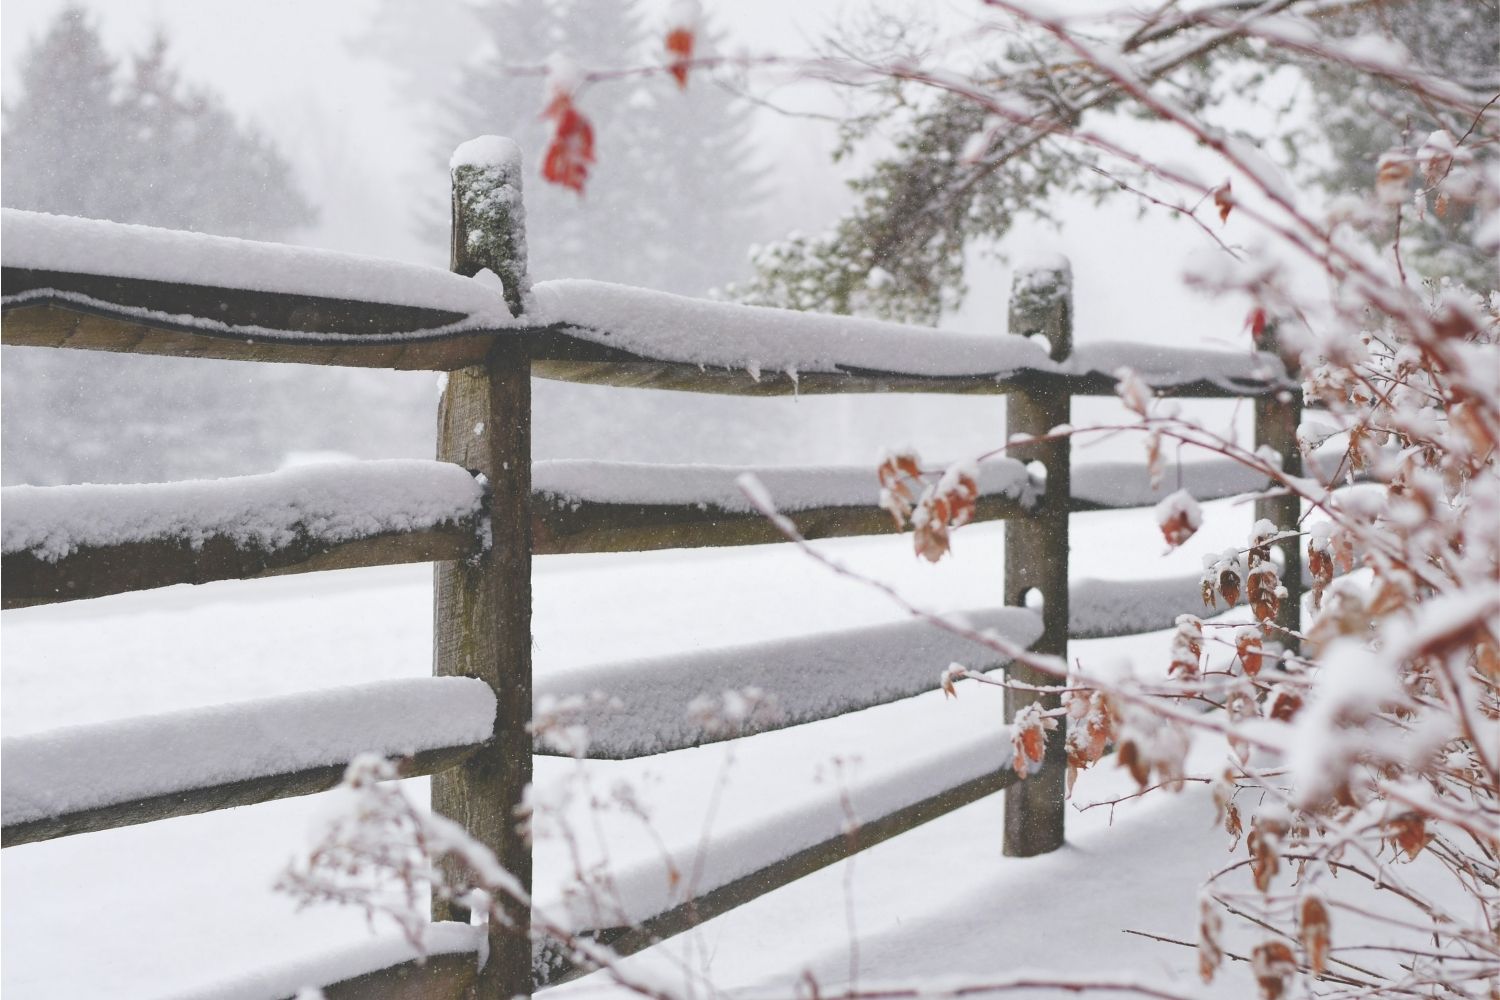 Fence Posts vs Winter: Will the cold weather hurt your fence posts?